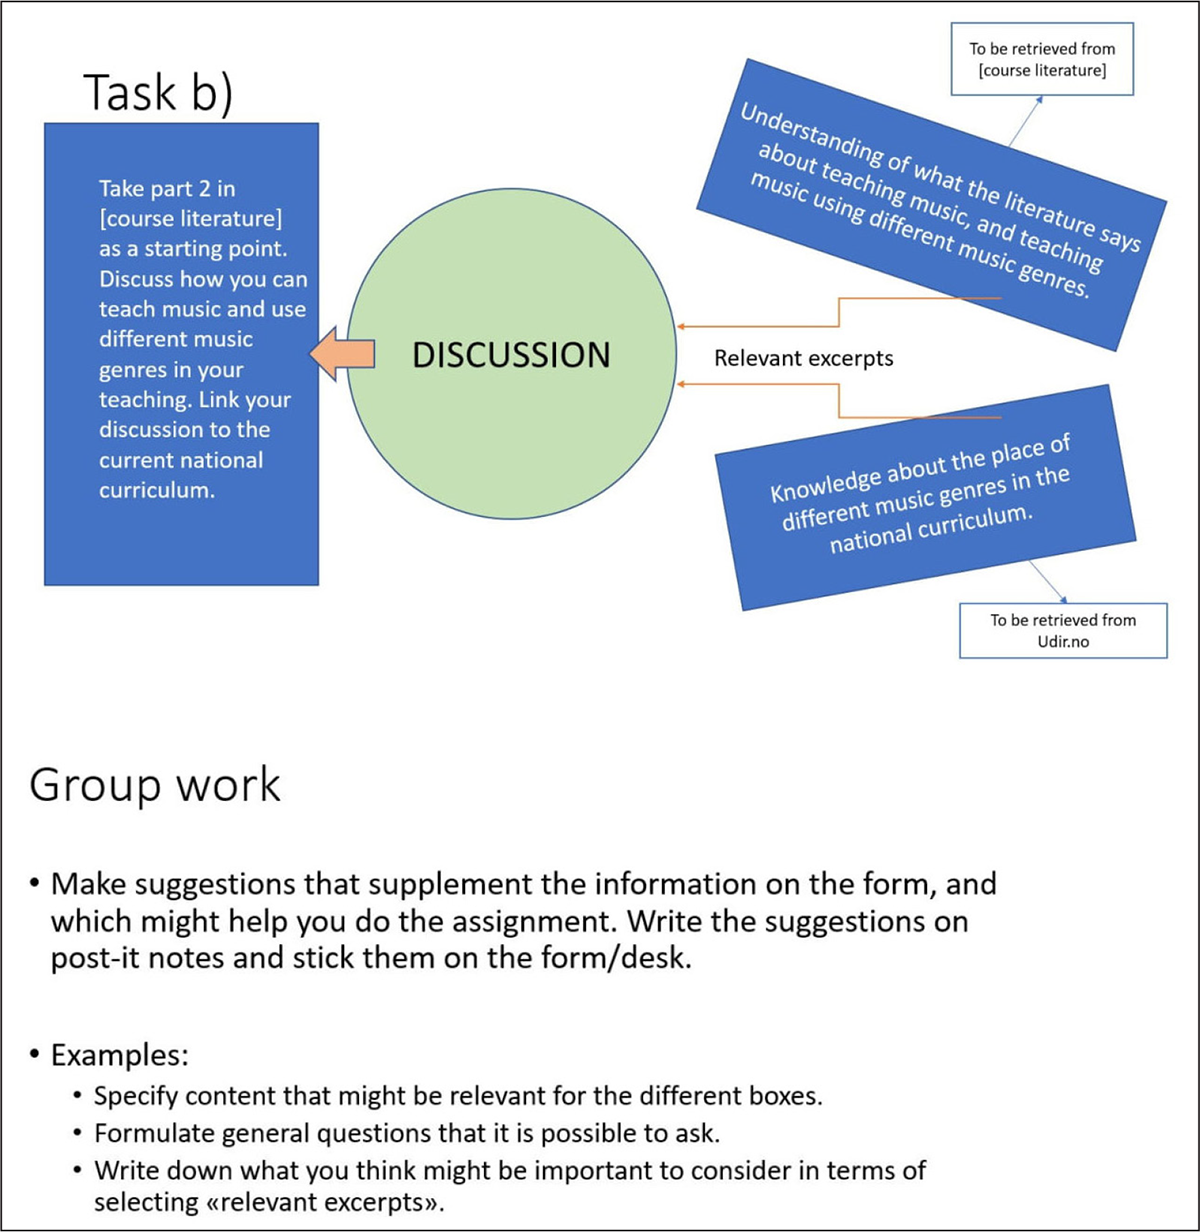 Example 4 illustrates a learning-to-write activity which first explains that in the assignment, the students will discuss how you can teach music and use different music genres in their teaching. The activity also tells the students to use course literature and the national curriculum in their discussion. In the group work, the students are instructed to make suggestions which can be useful to answer the assignment. They can specify content that might be relevant in the different boxes, formulate general questions that are possible to ask, or write down what they think might be important to consider in terms of selecting “relevant excerpts.”